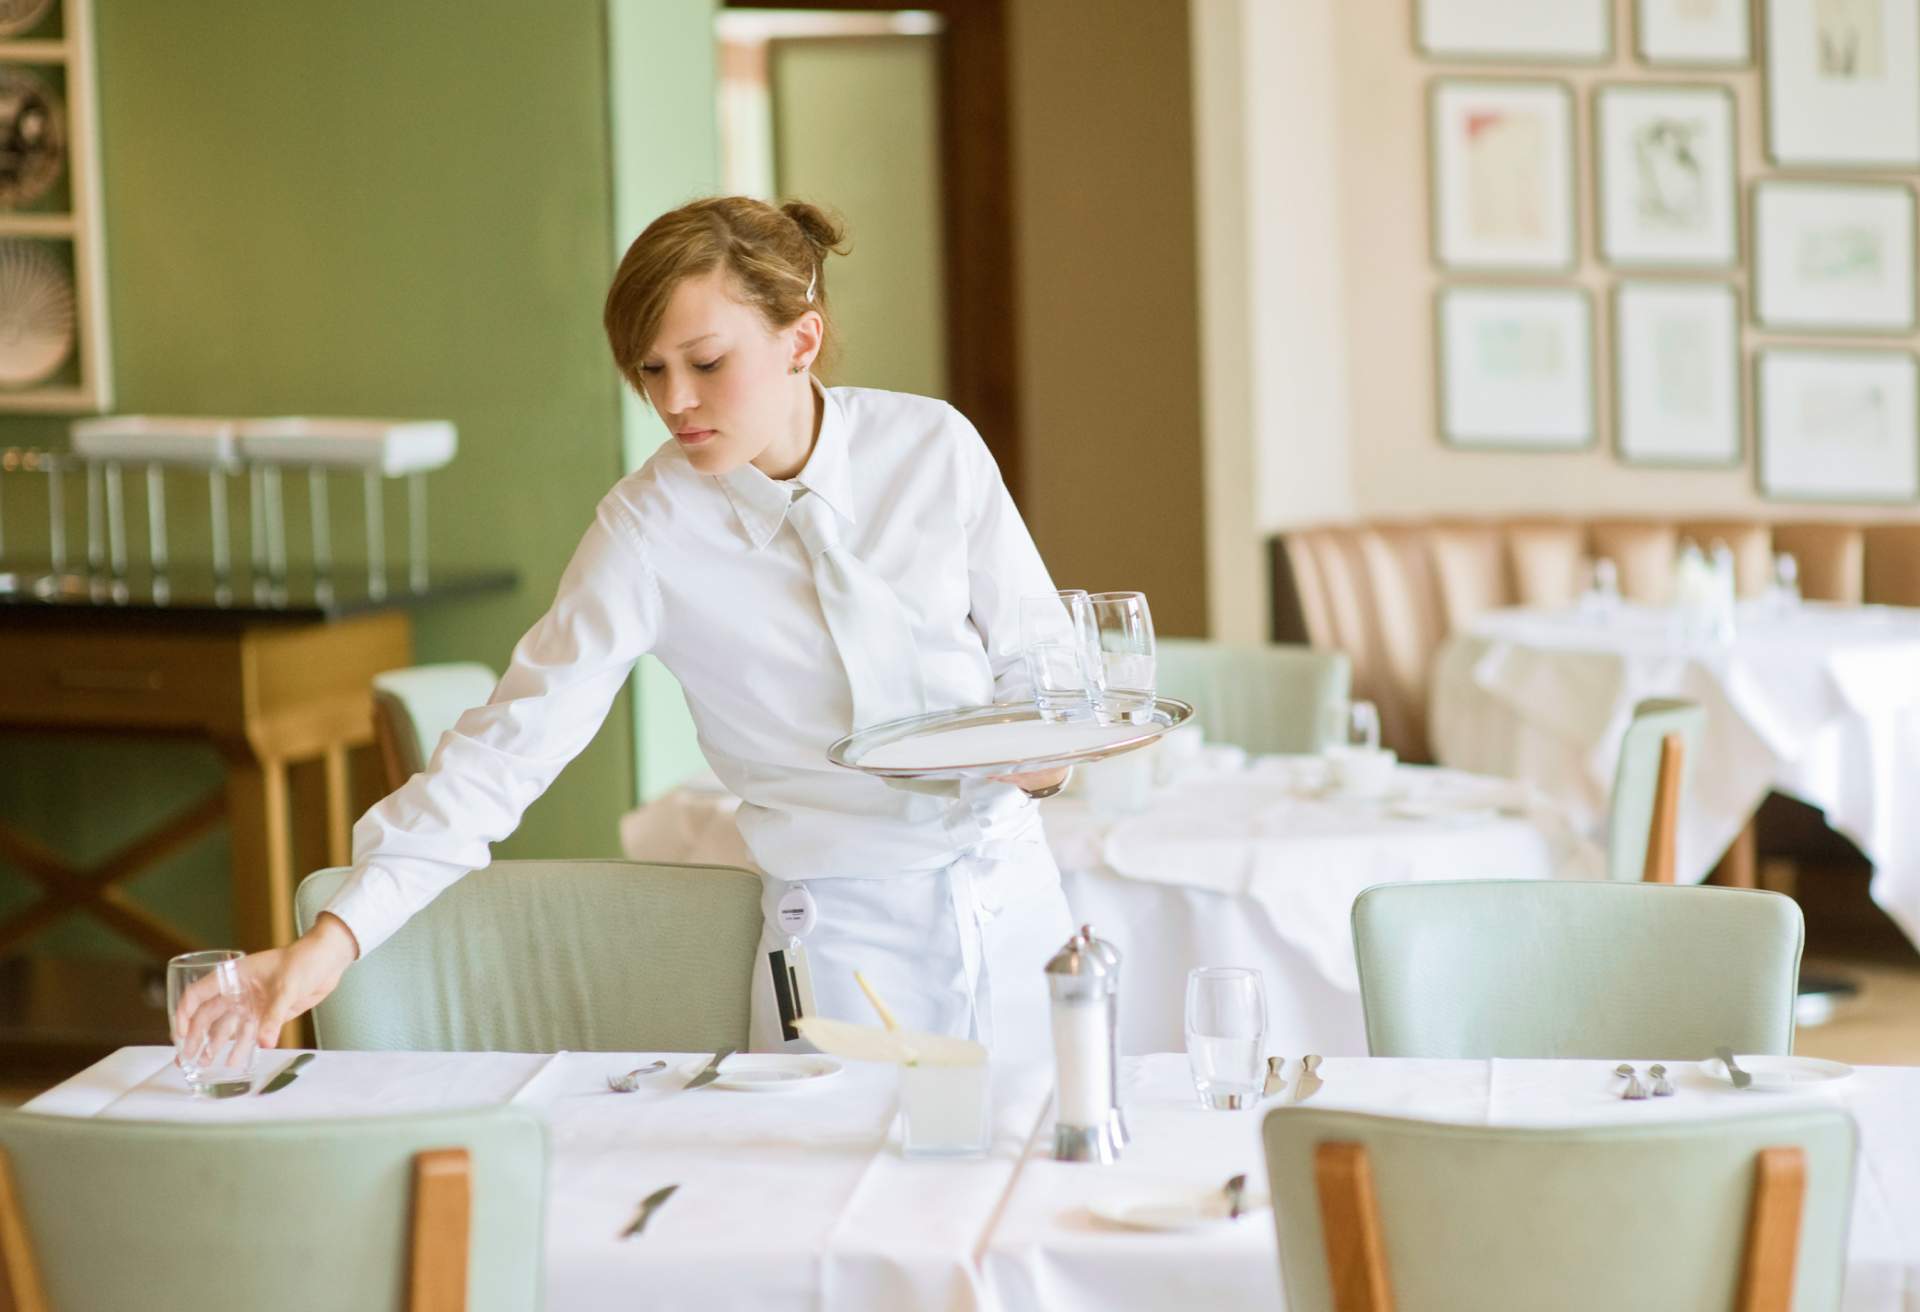 Image depicts a server setting a table. They are dressed in all white and the chairs in the restaurant are a mint green hue.